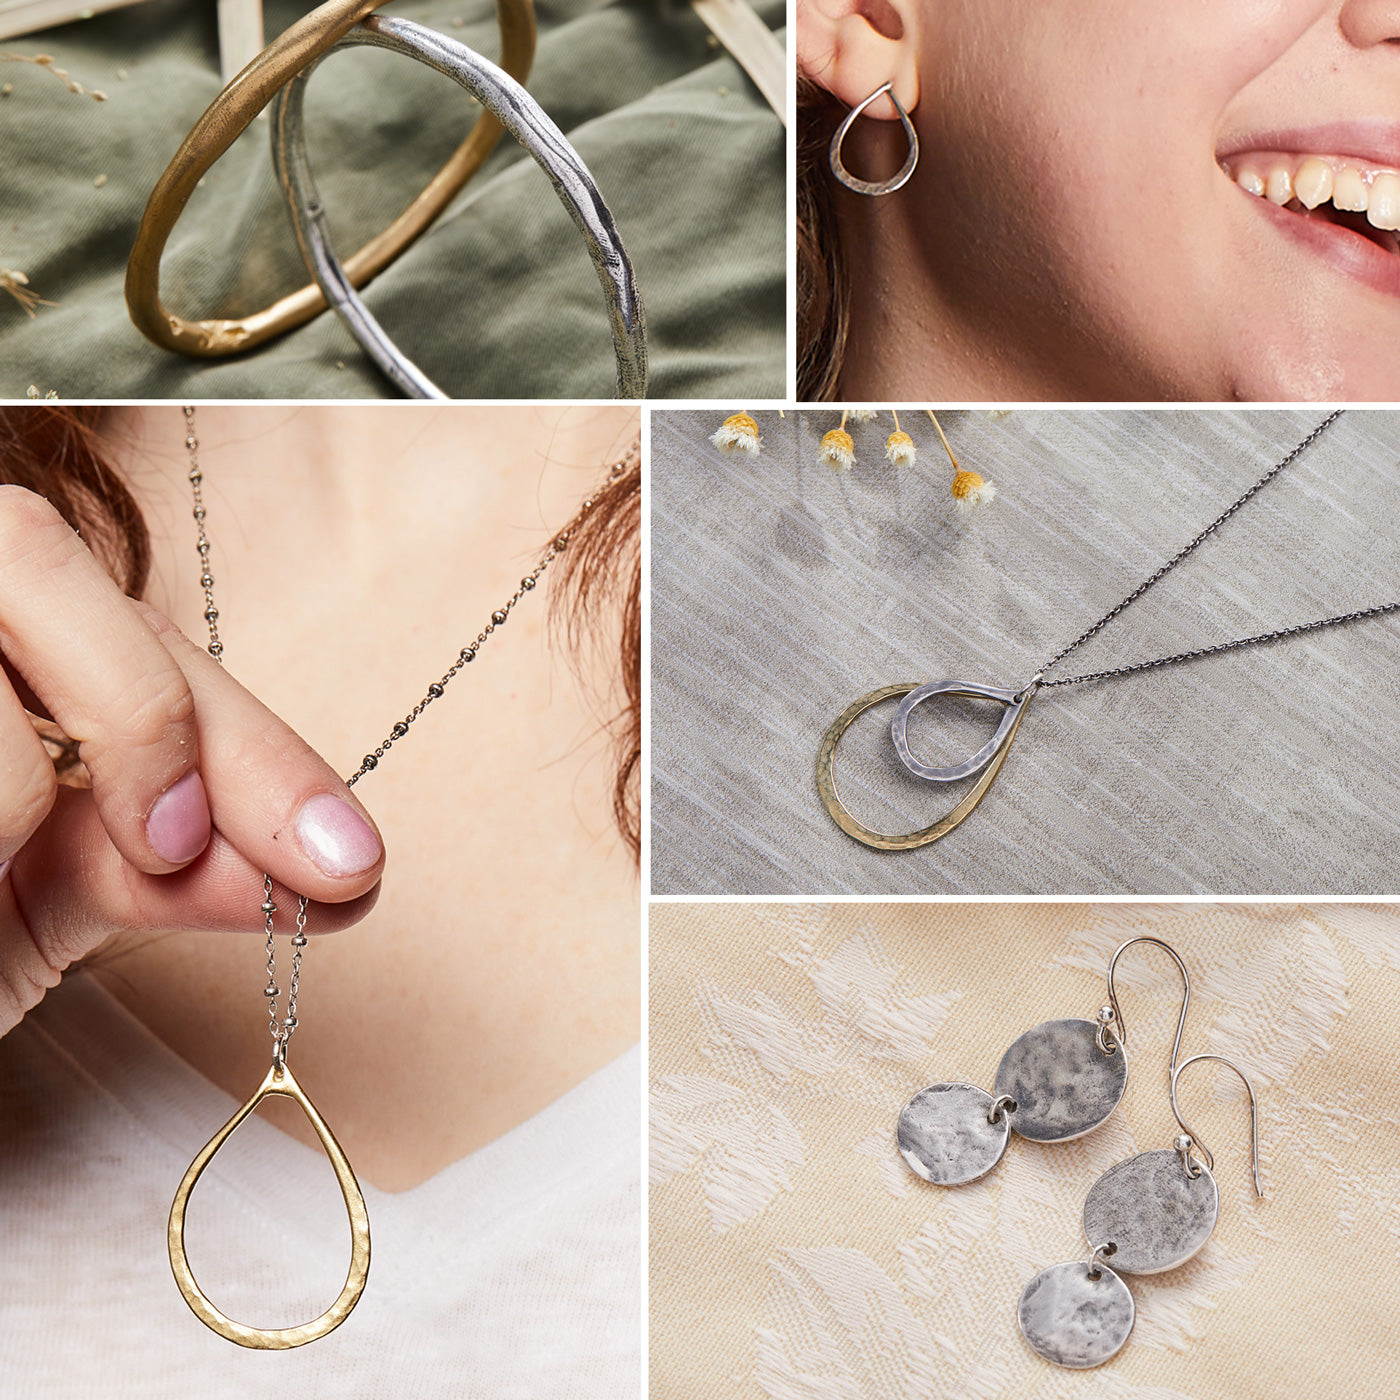 6-Quick & Easy Jewelry Styling Tips: Get ready for Summer Fun!